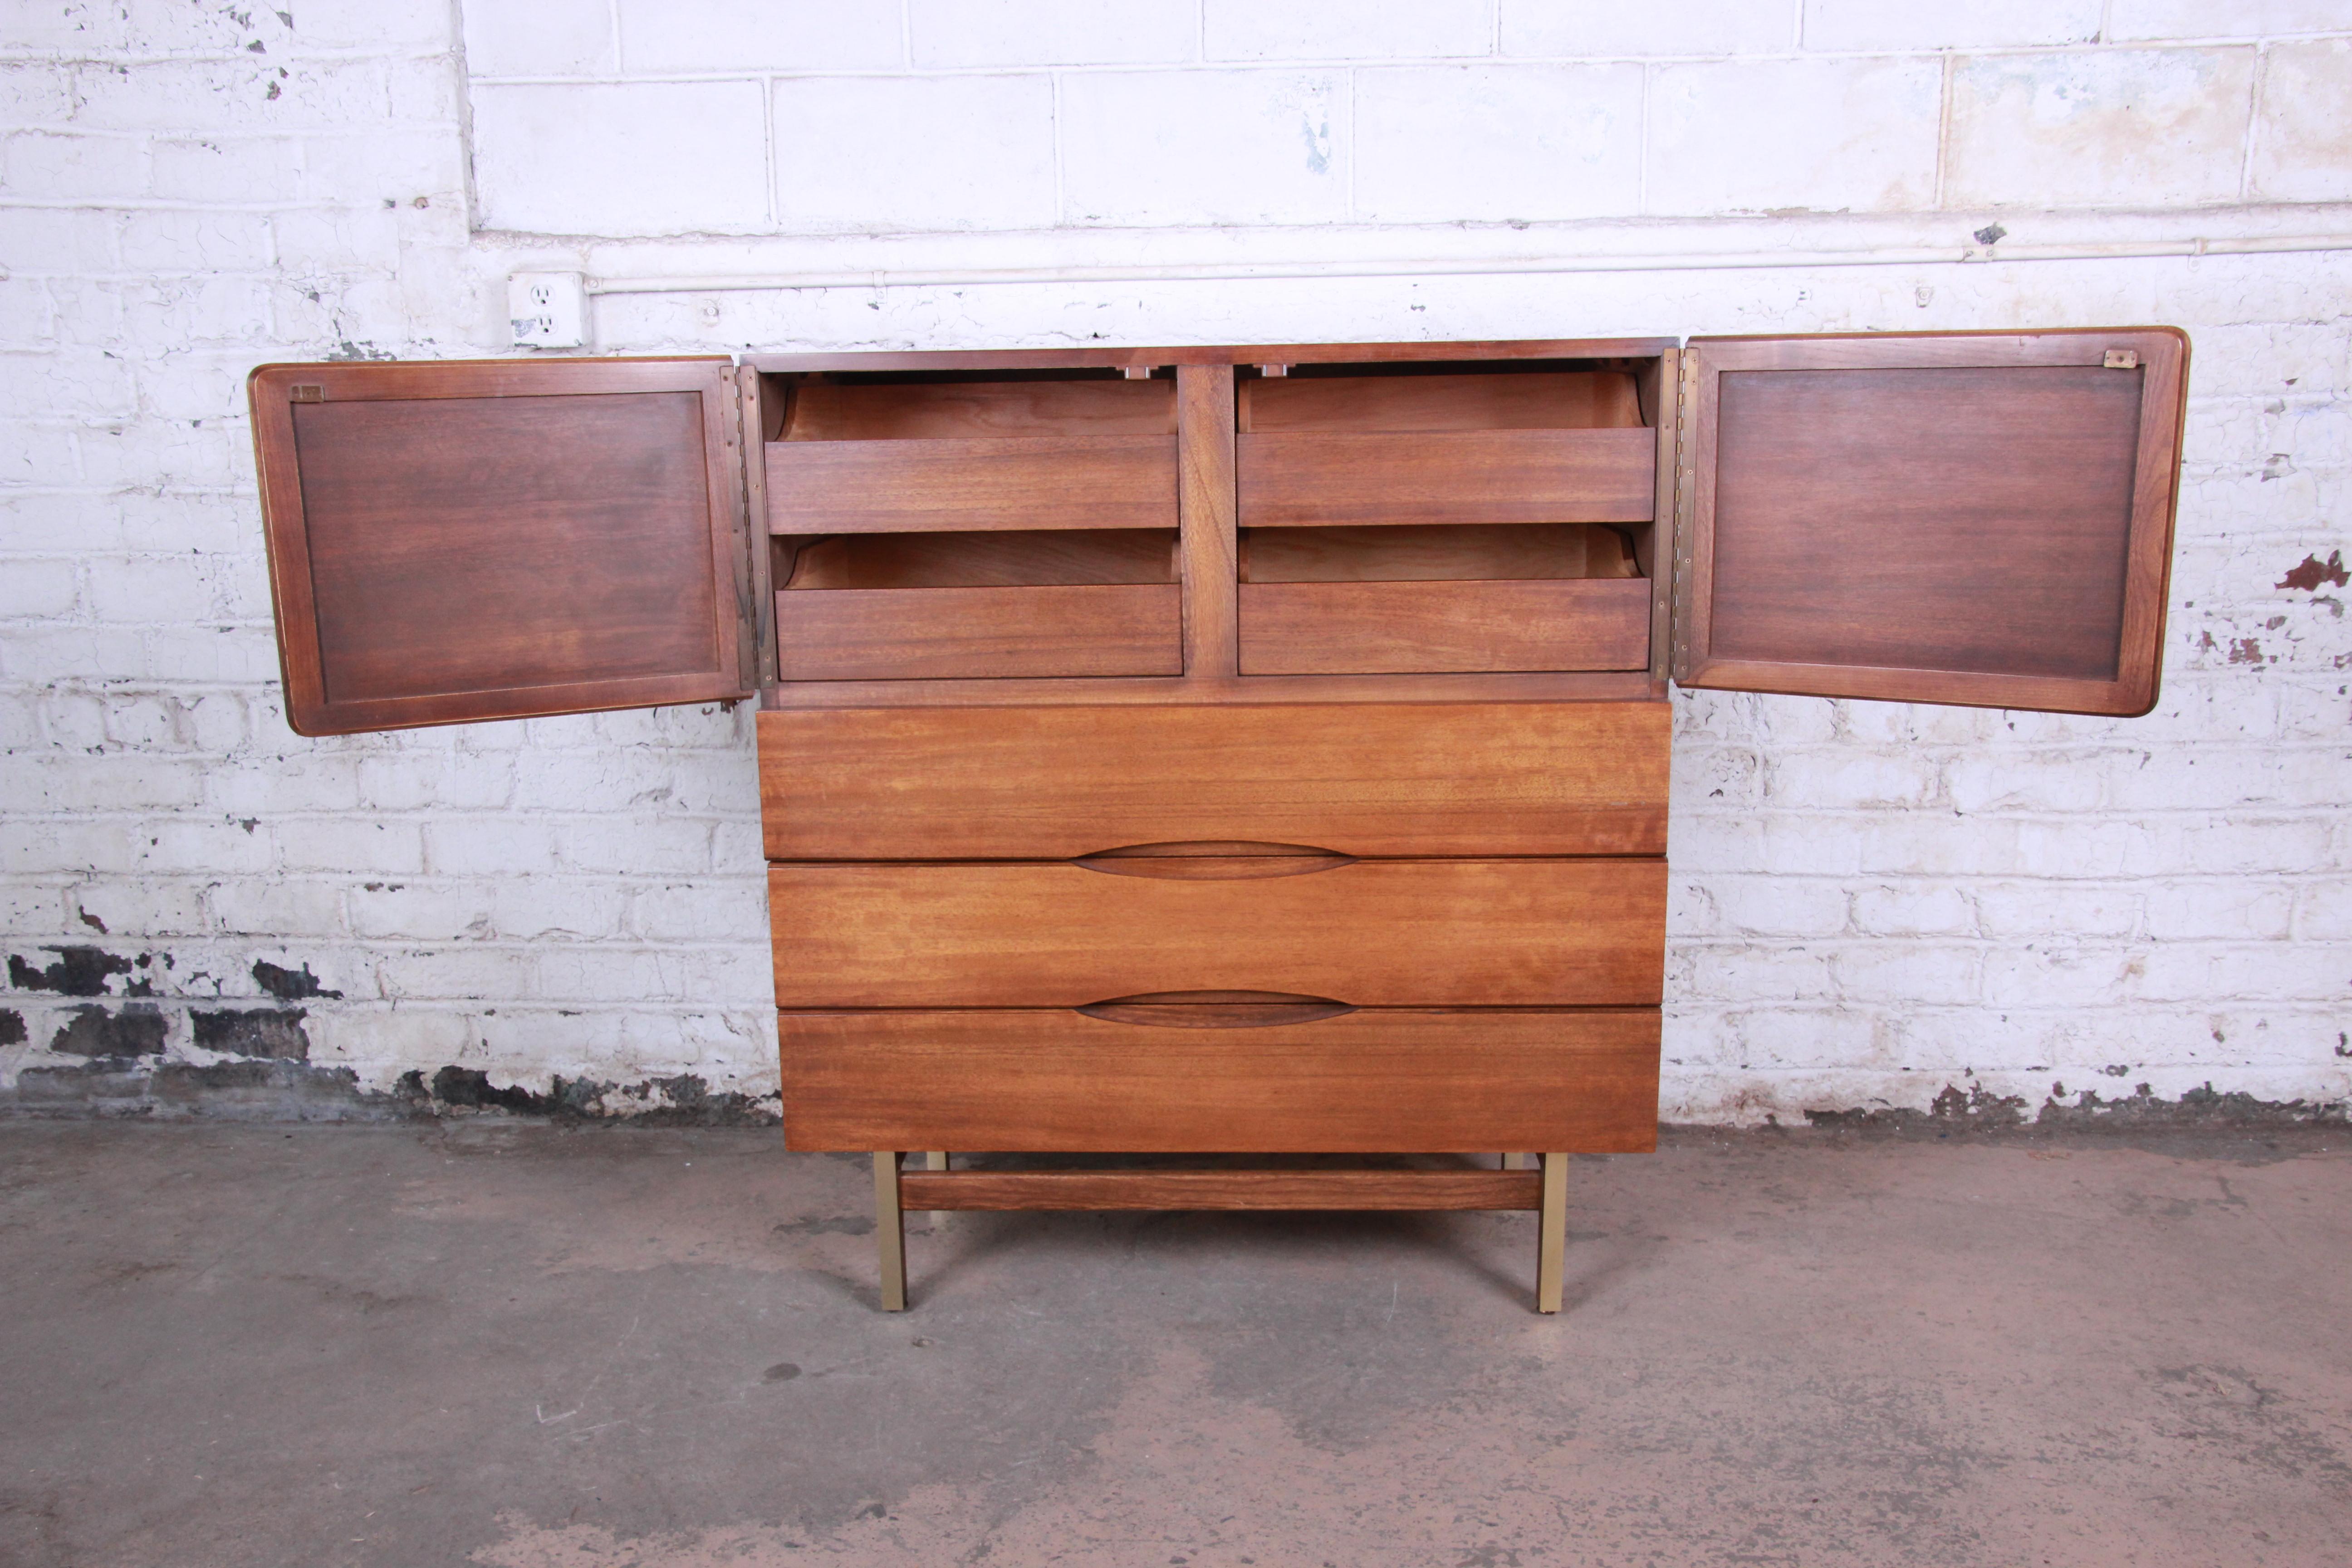 A very nice Mid-Century Modern walnut gentleman's chest by American of Martinsville. The dresser features gorgeous walnut wood grain, with brass-trimmed legs. It offers ample room for storage, with four drawers behind two woven-front doors at the